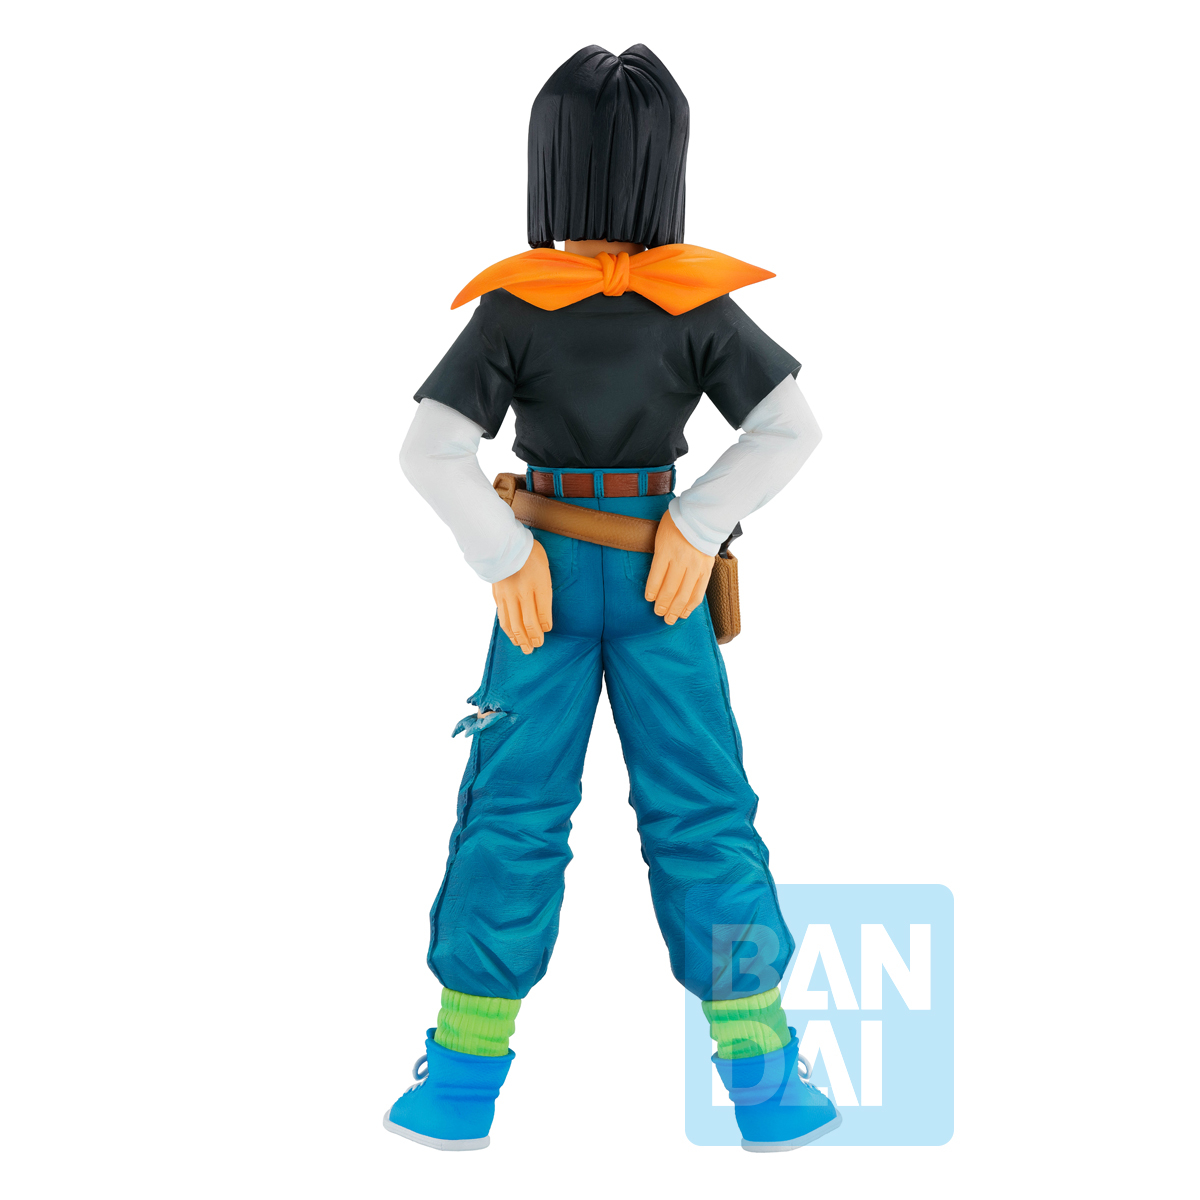 JAN228655 - DRAGON BALL Z ANDROID FEAR ANDROID NO 17 PX ICHIBAN